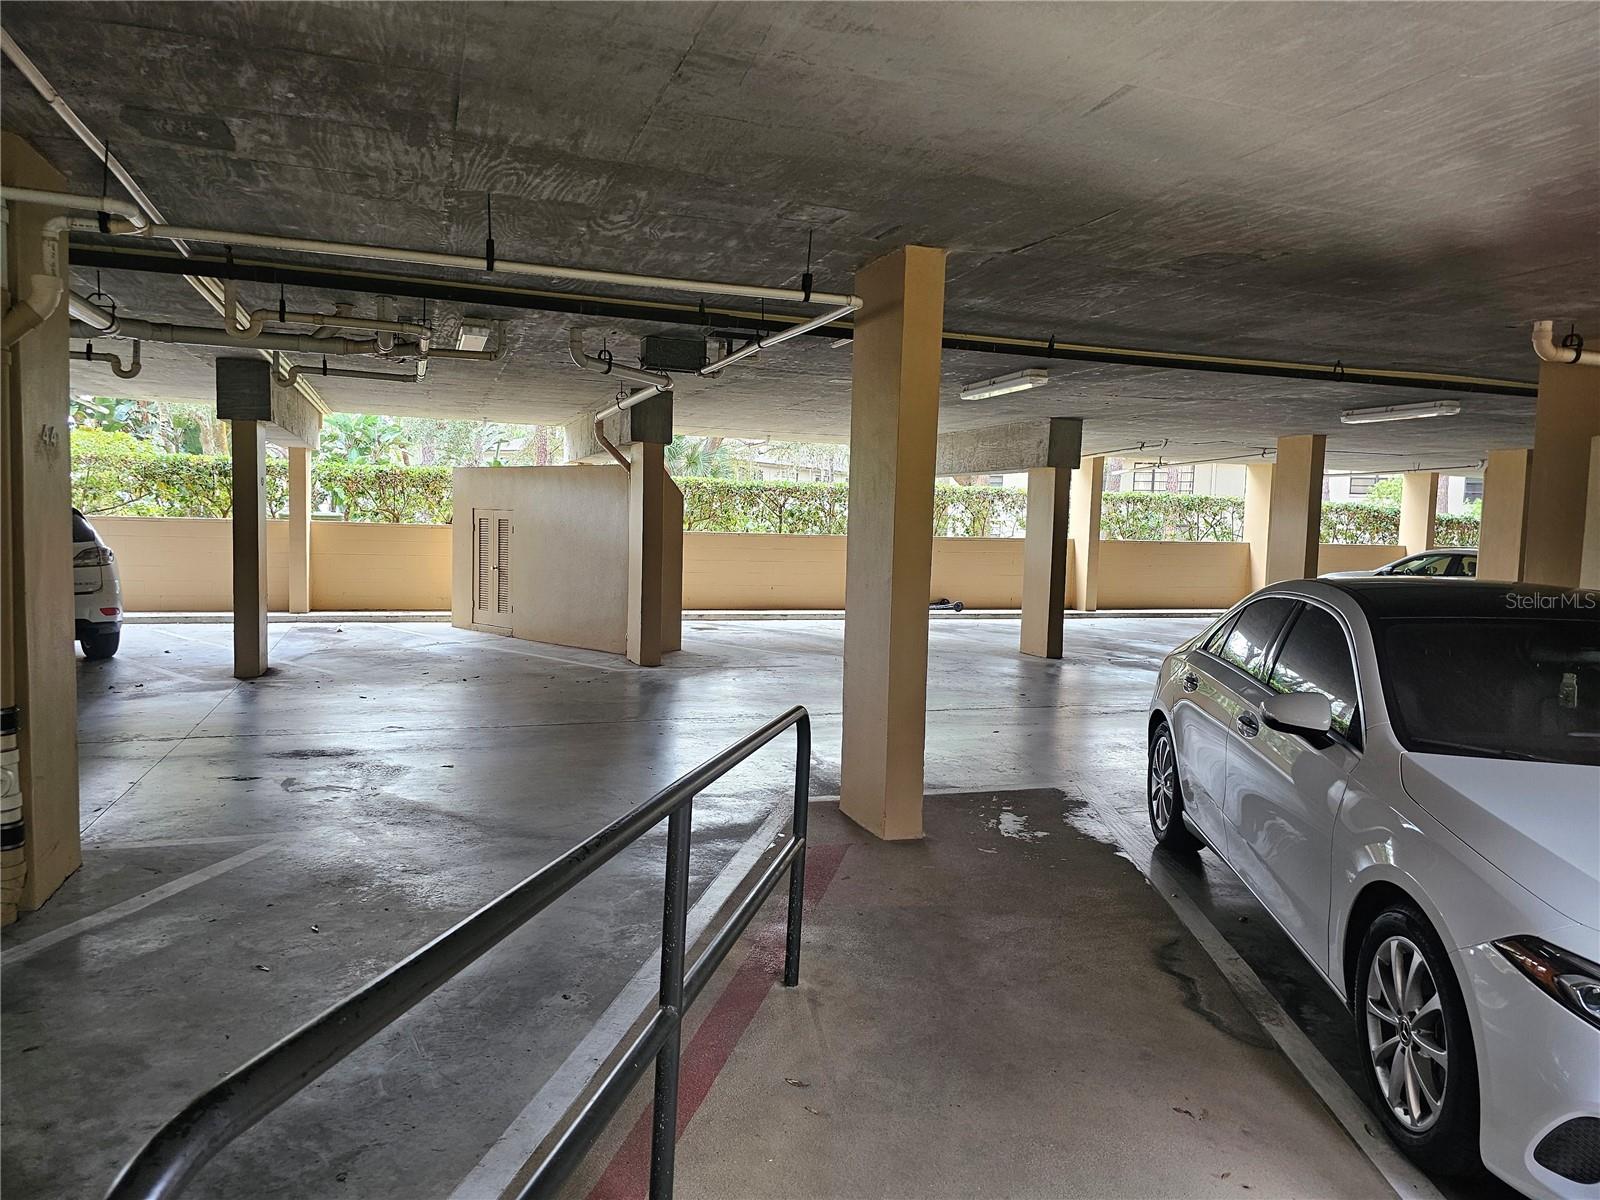 Covered parking with back entrance to elevator